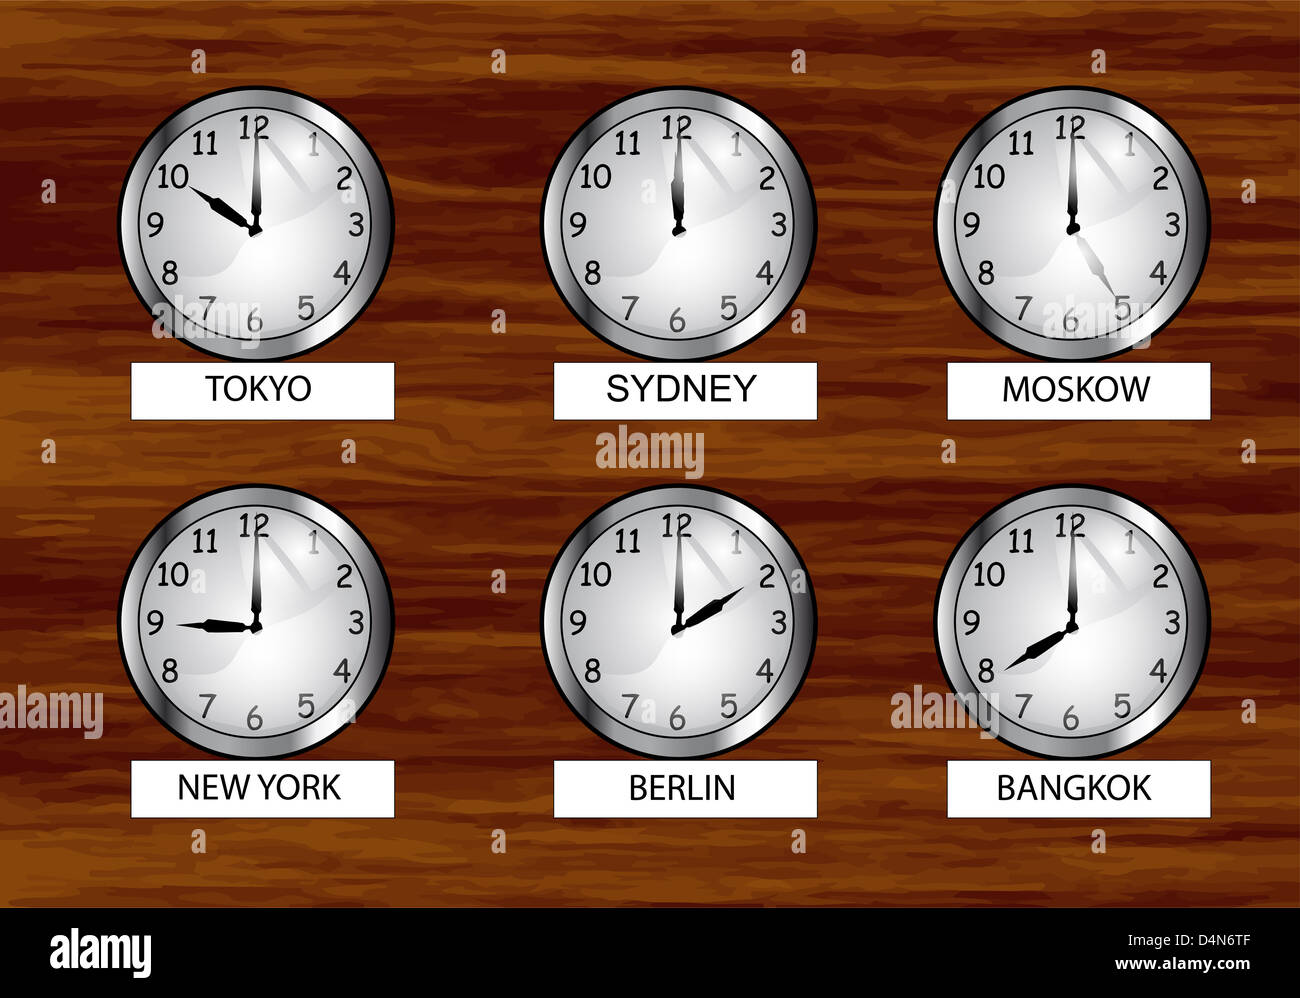 the world clock. different time zones clock on the wooden wall Stock Photo